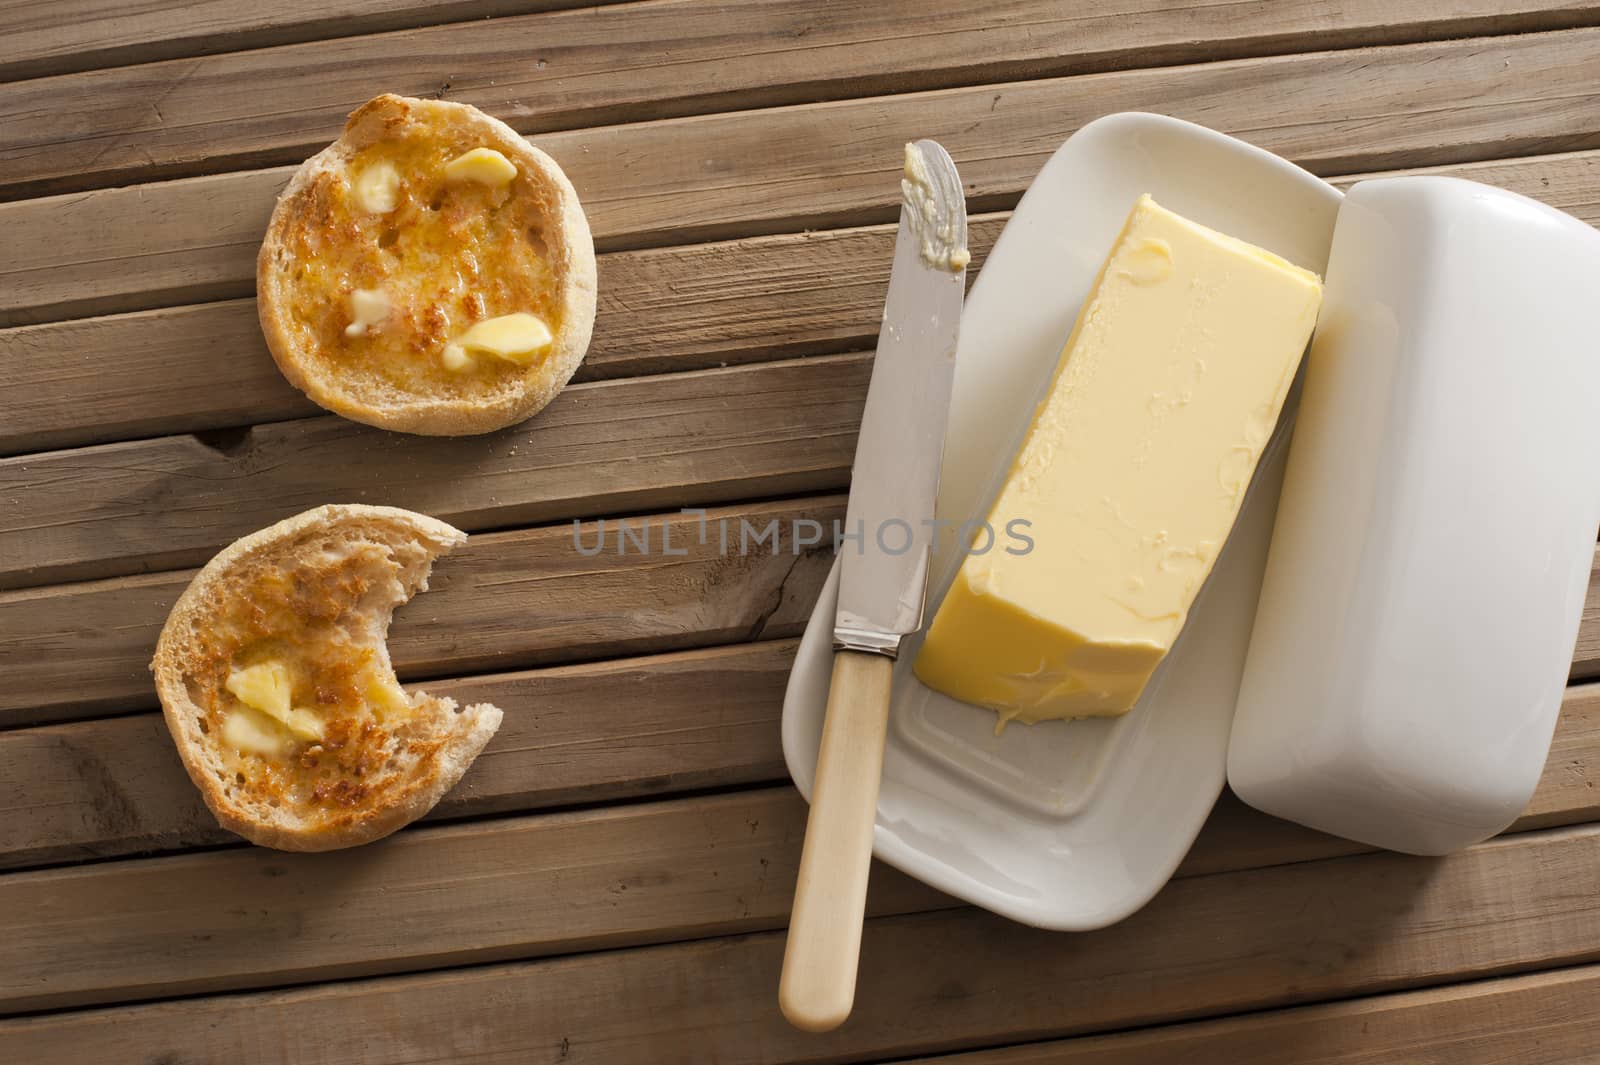 One yellow stick of butter on tray with knife besides two toasted english muffins on wood slat table